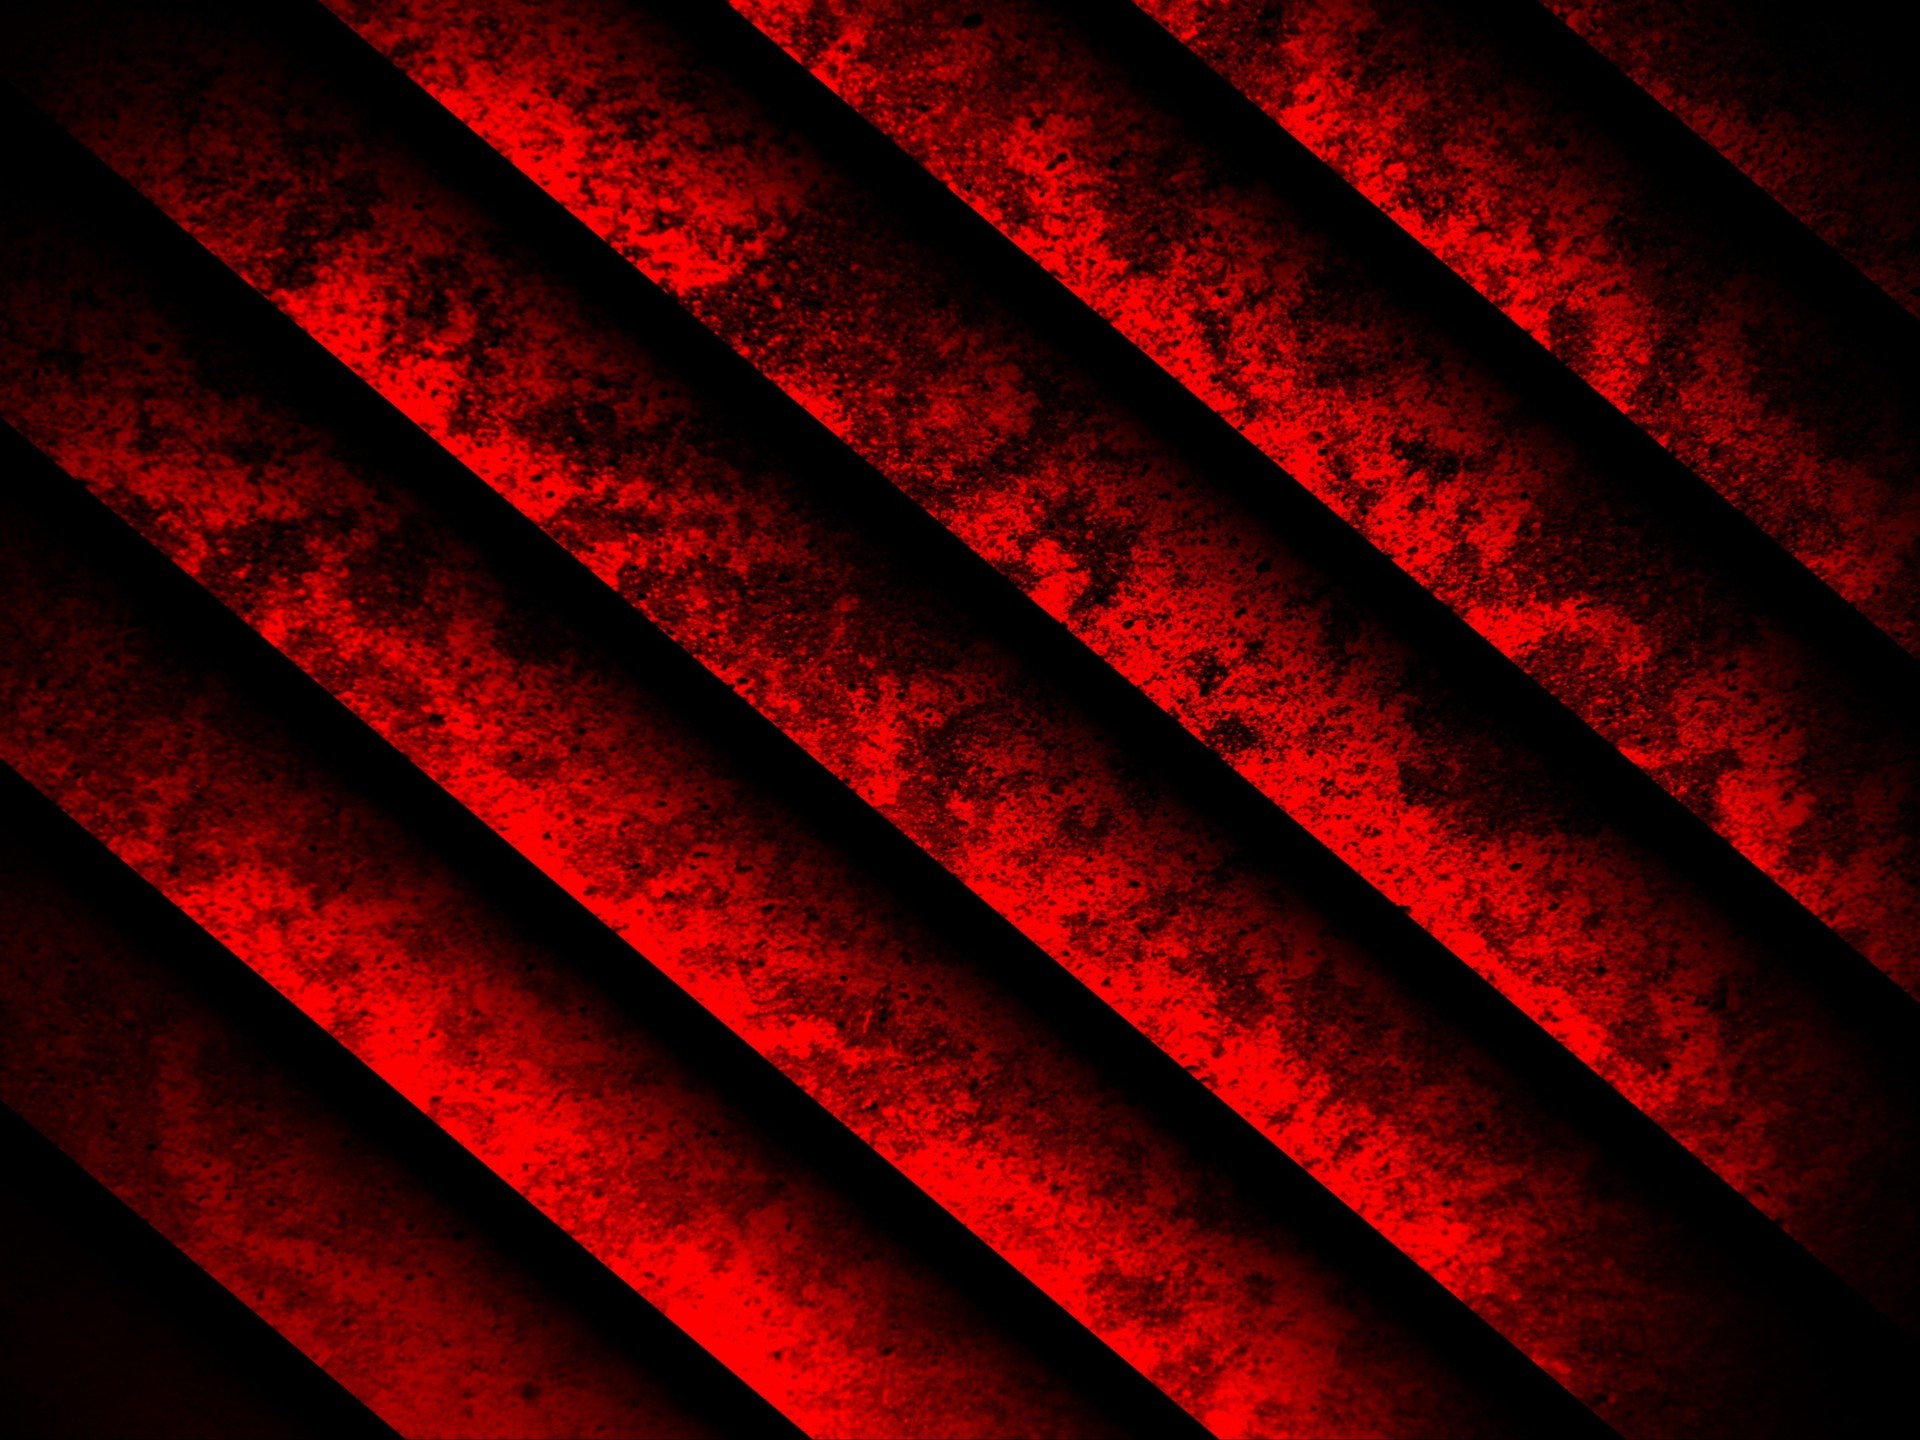  Red  Grunge background    Download free  amazing wallpapers 